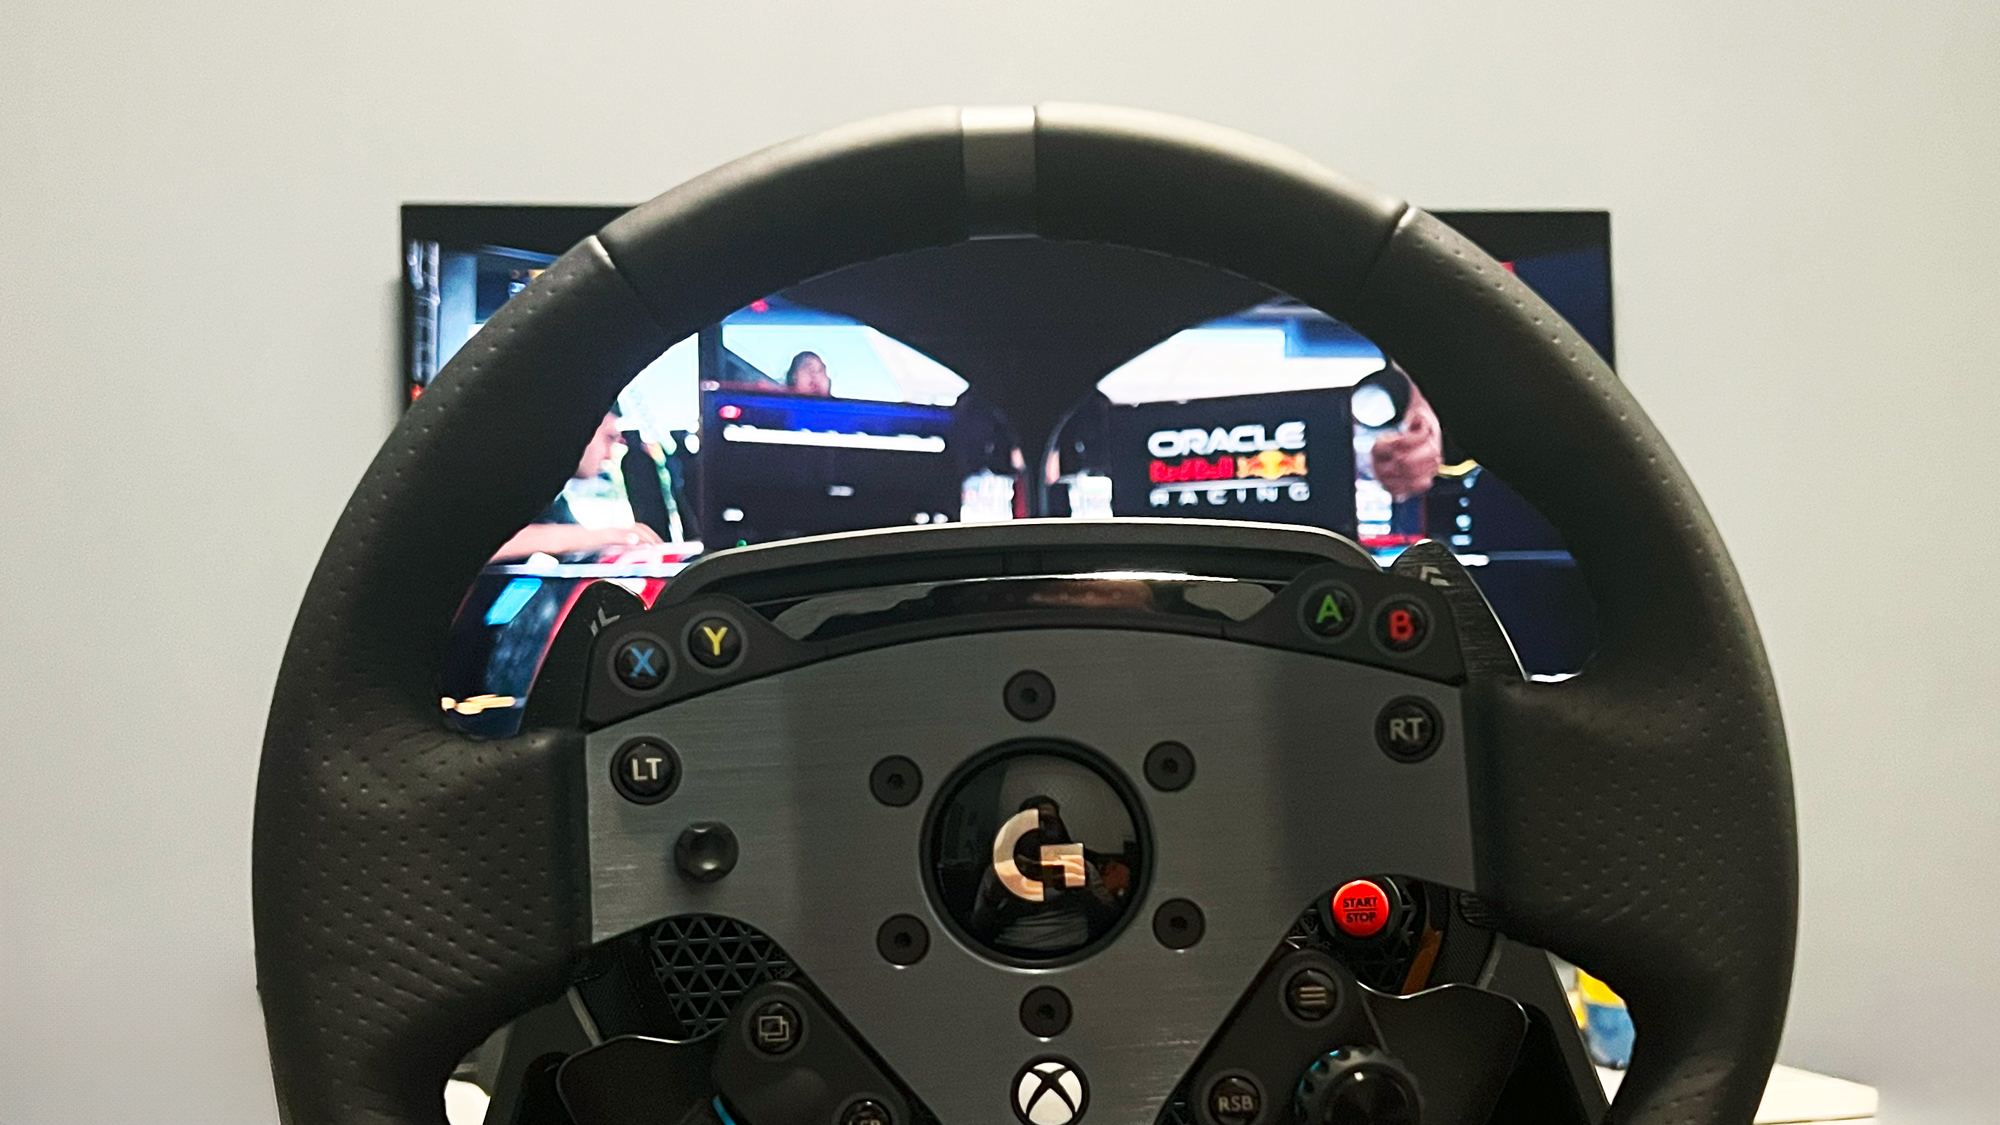 I've been using the Logitech G29 wheel for two years - Review